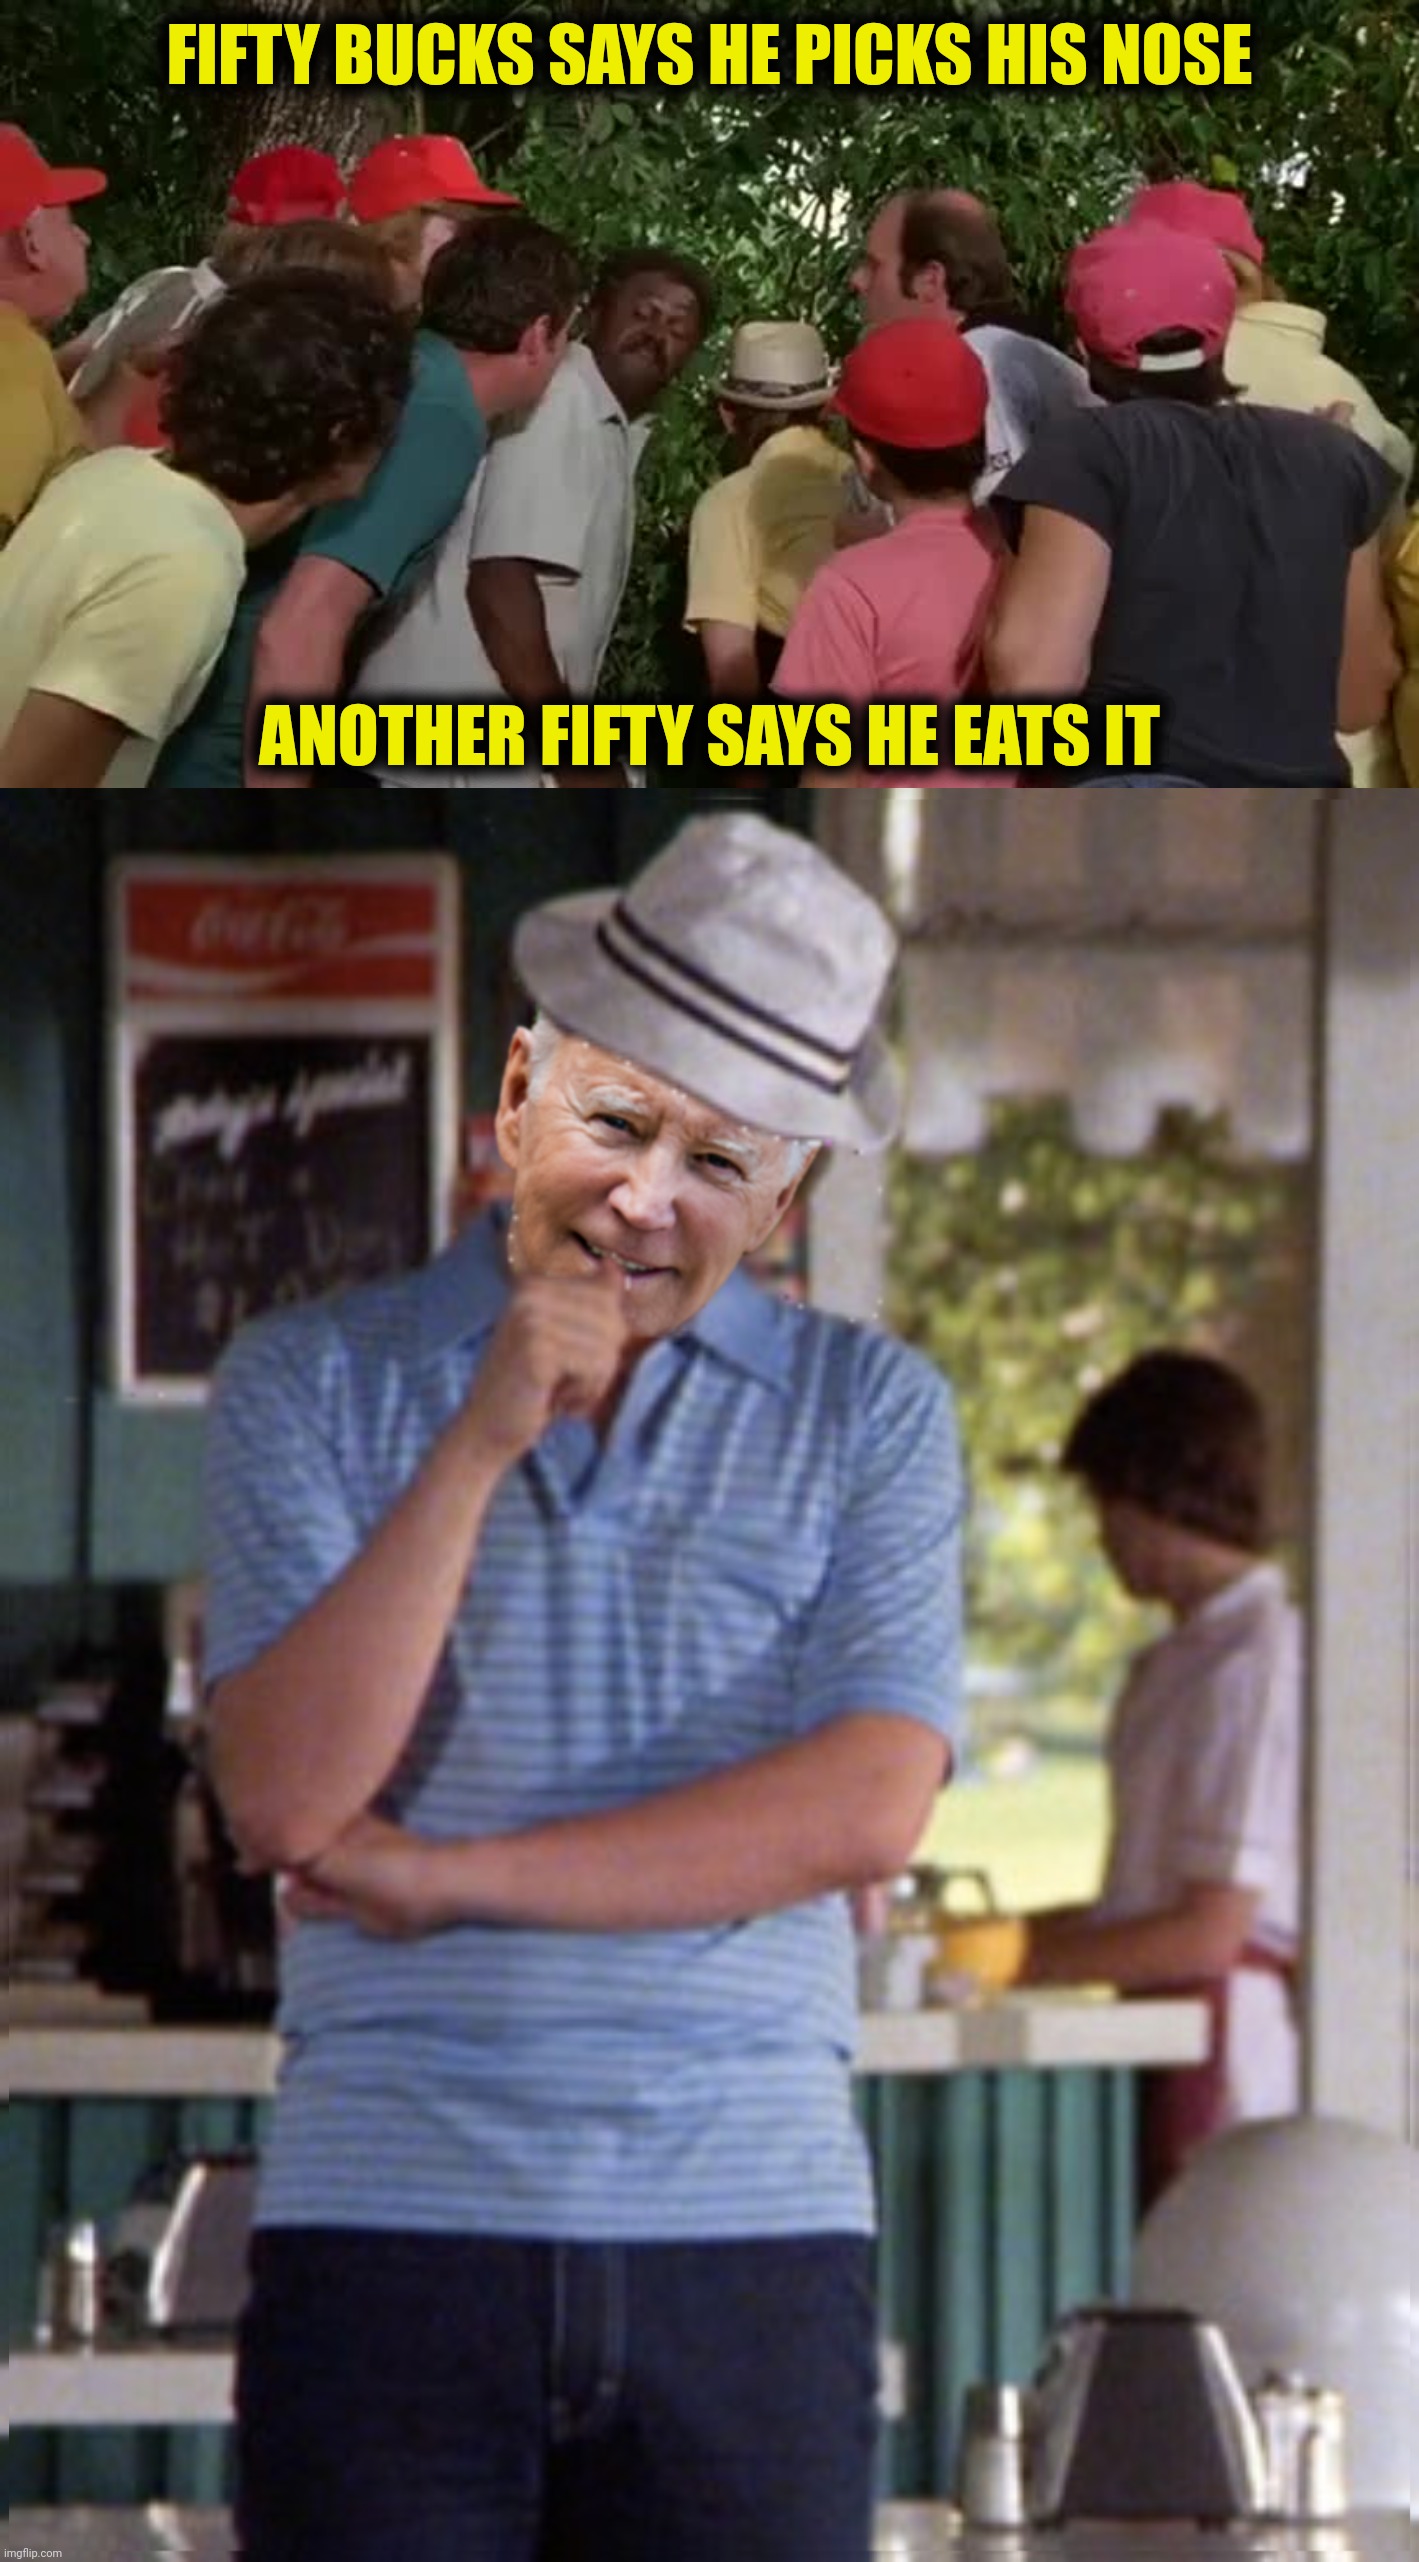 FIFTY BUCKS SAYS HE PICKS HIS NOSE ANOTHER FIFTY SAYS HE EATS IT | made w/ Imgflip meme maker